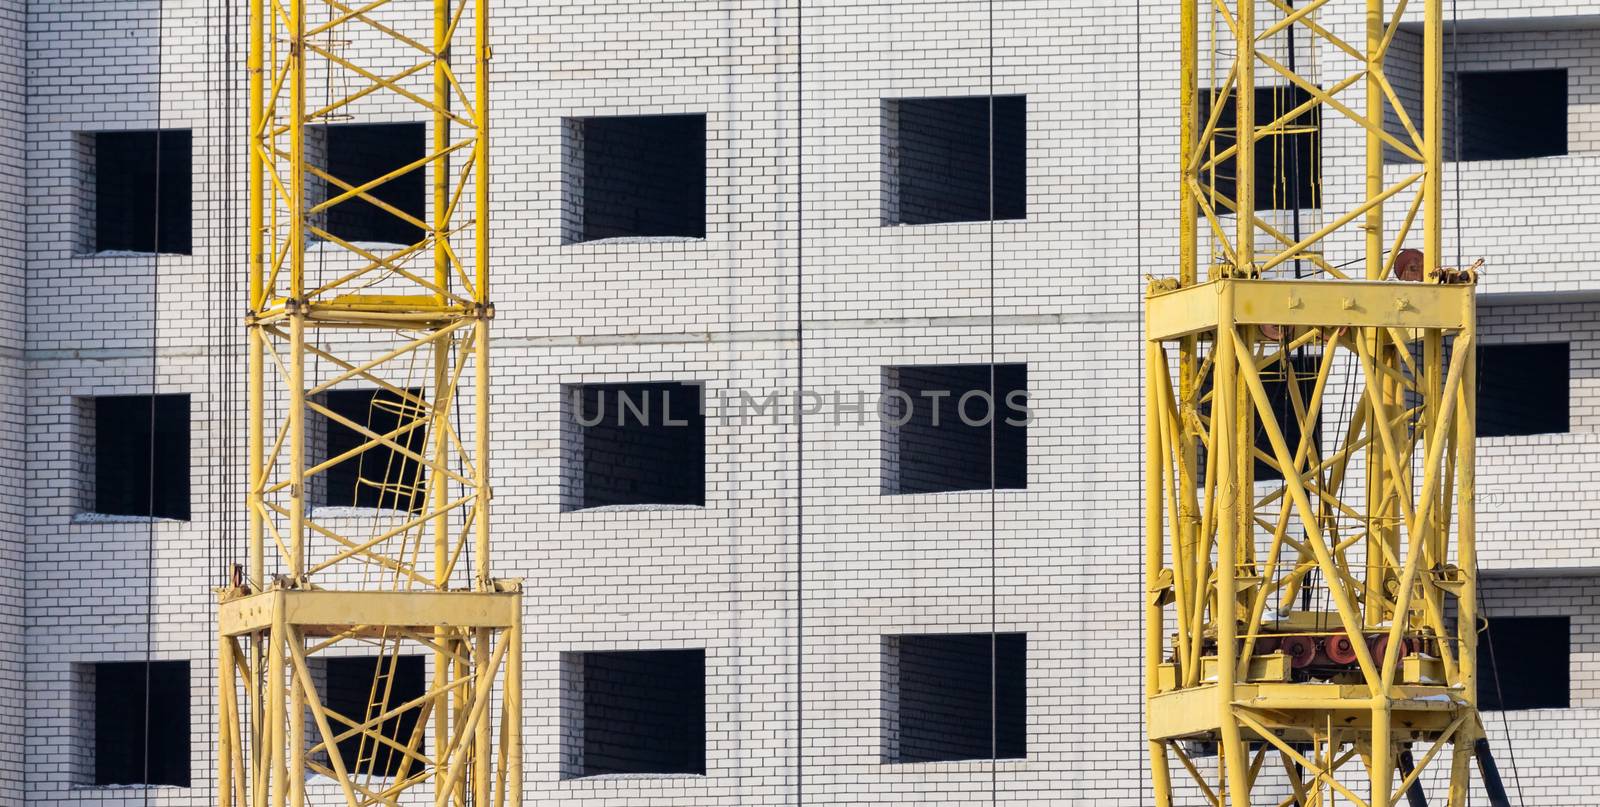 Construction site. Unfinished apartment building made of white bricks. Special yellow industrial construction cranes. Empty windows and balconies.